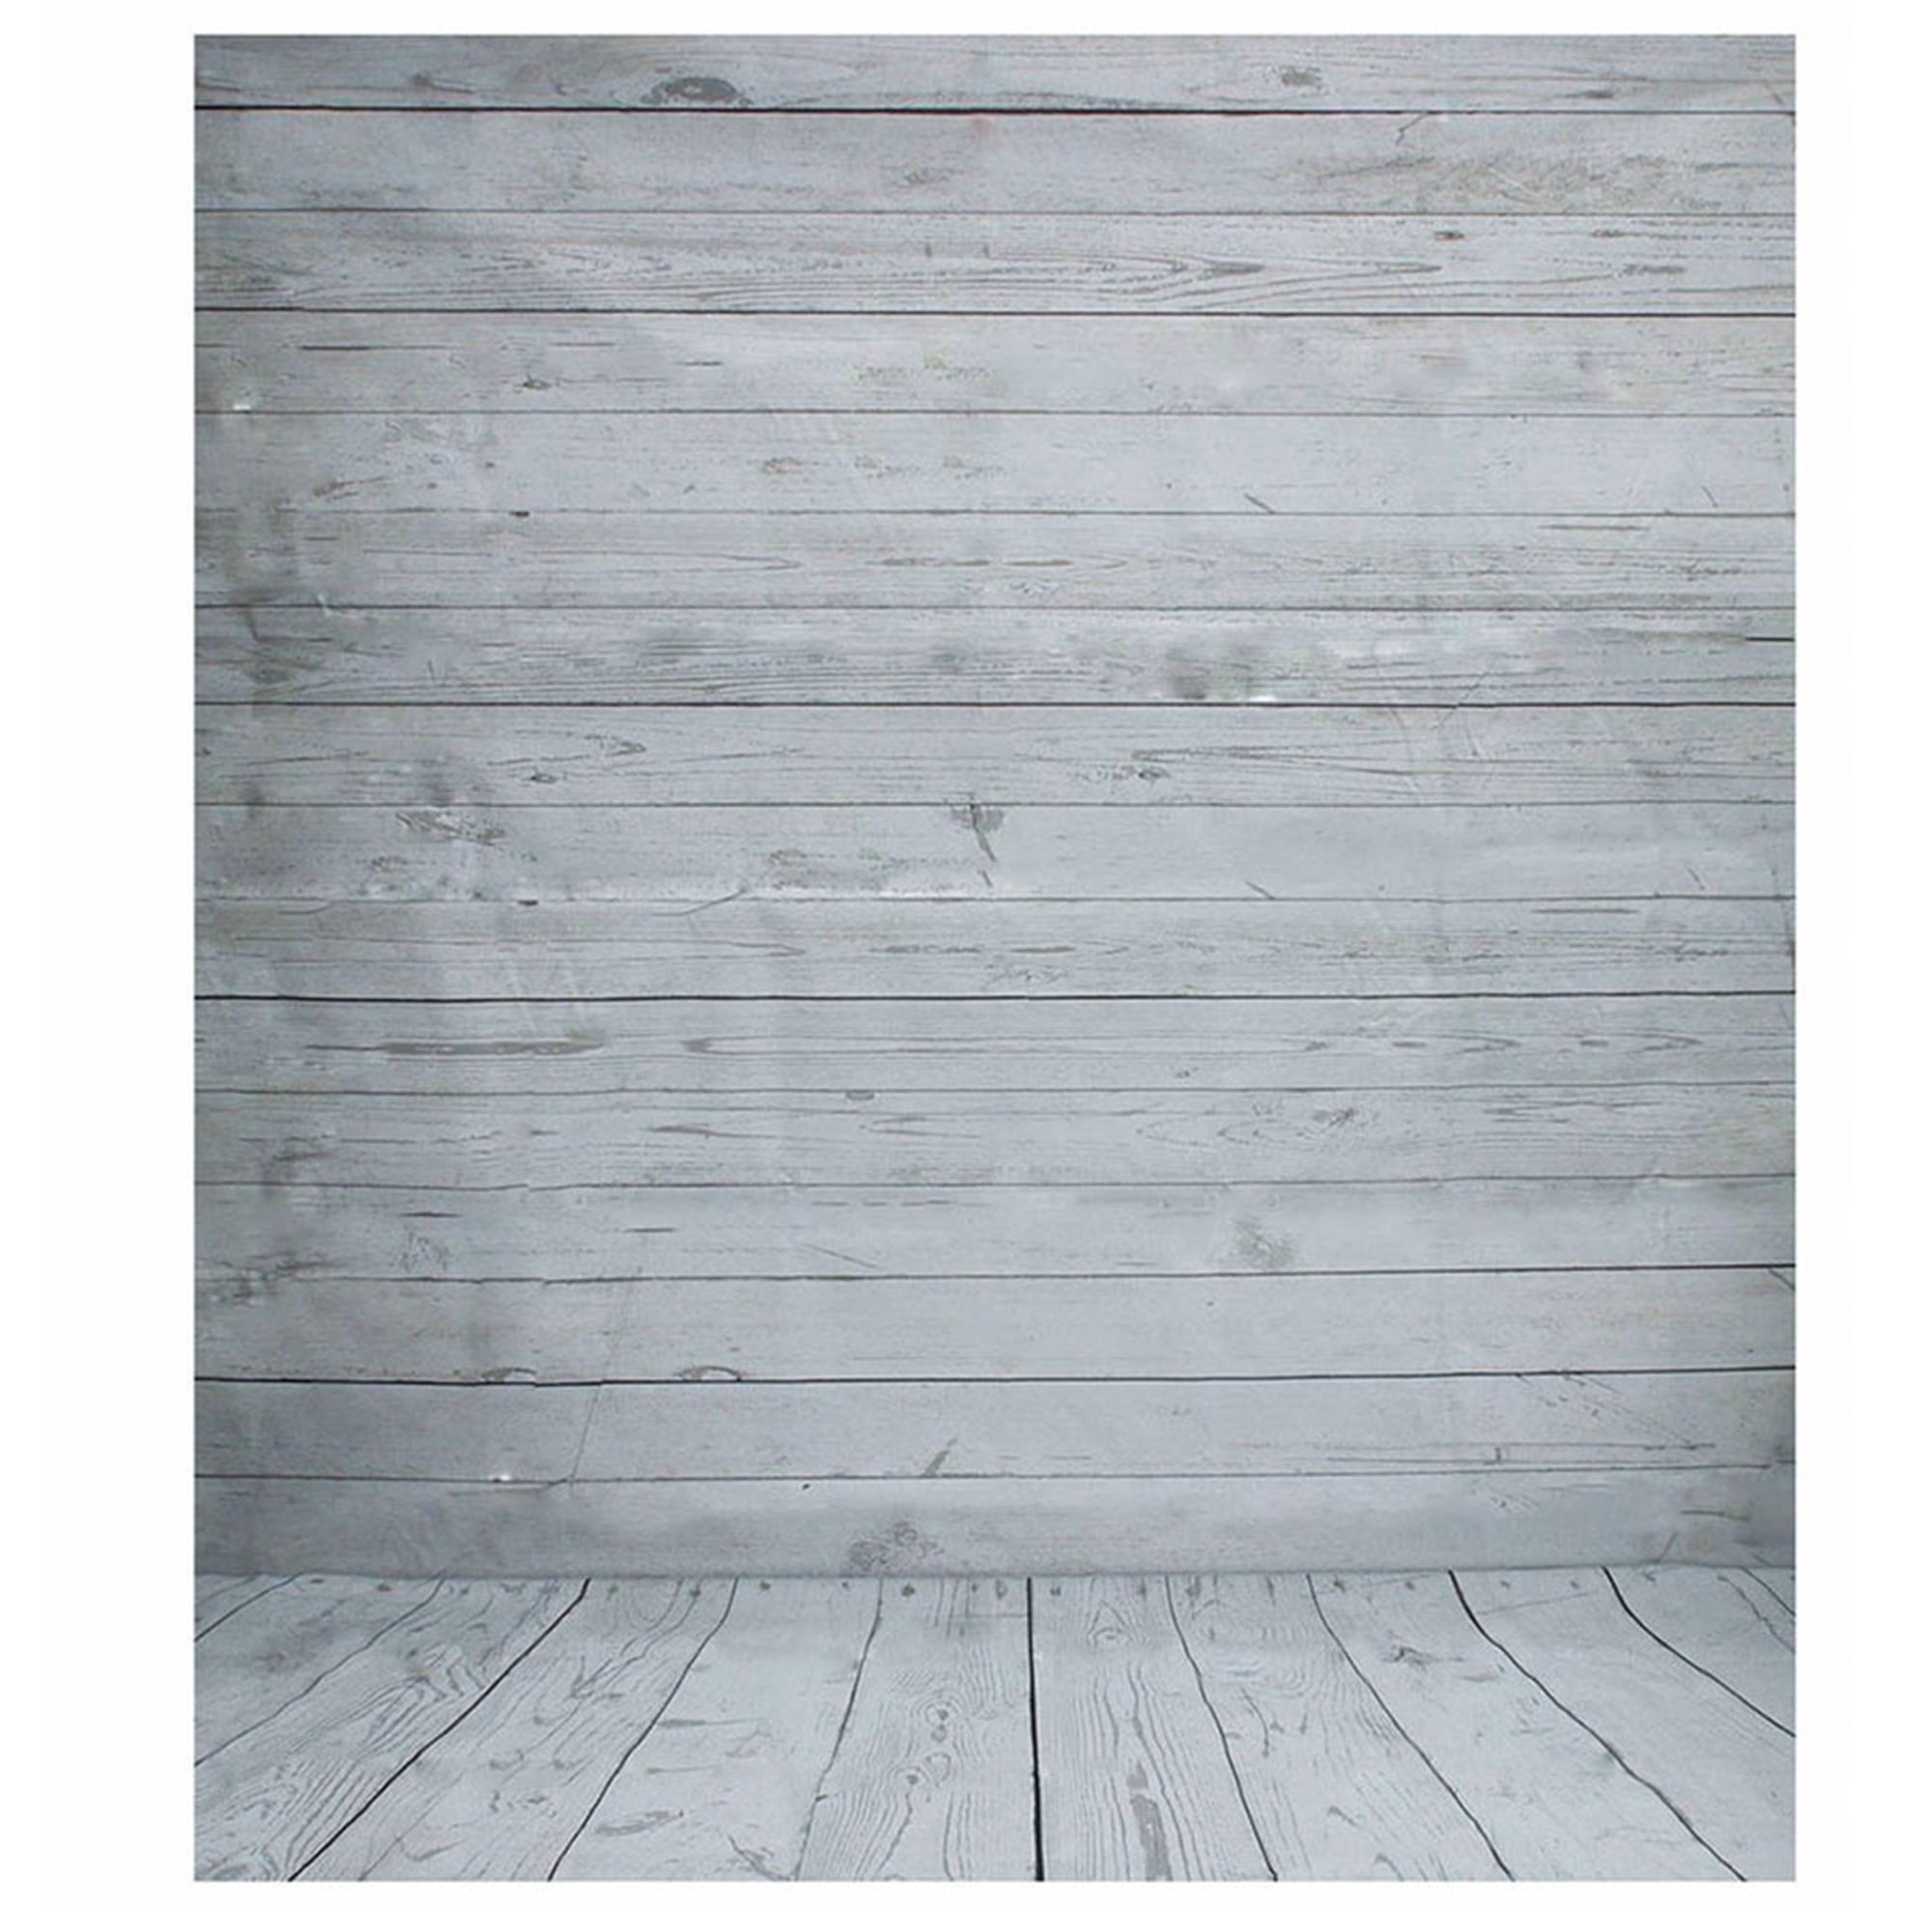 5x7FT Soft Fabric Wood Wall Floor Photography Backdrop Studio Prop Newborn  Baby Photoshoot Abstract Portraits Photo Background Photographer Props 